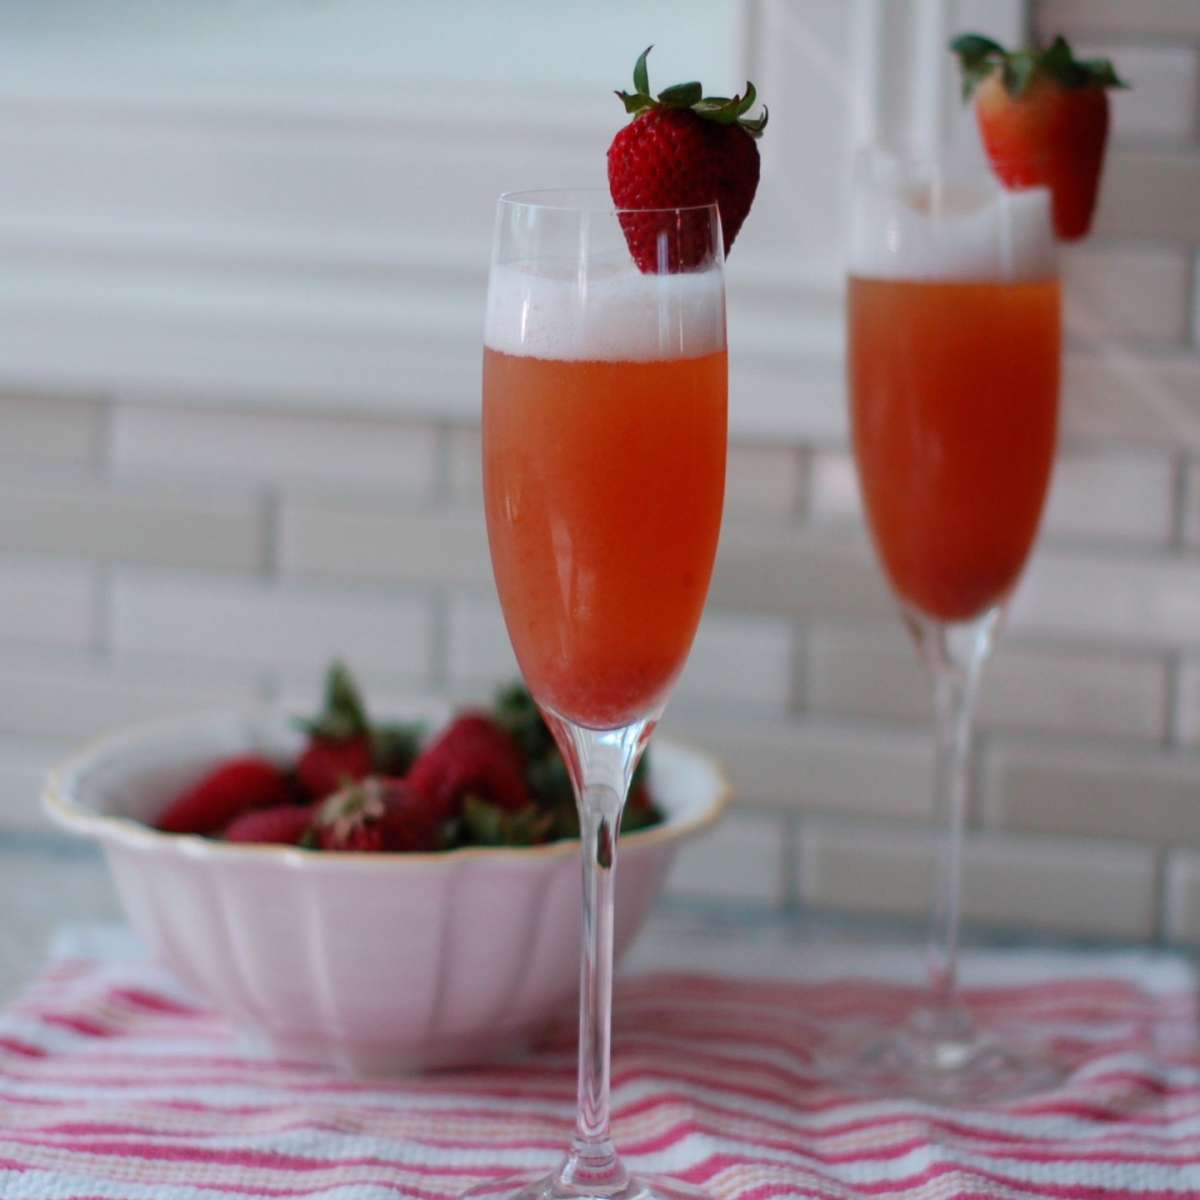 Mimosa alle fragole